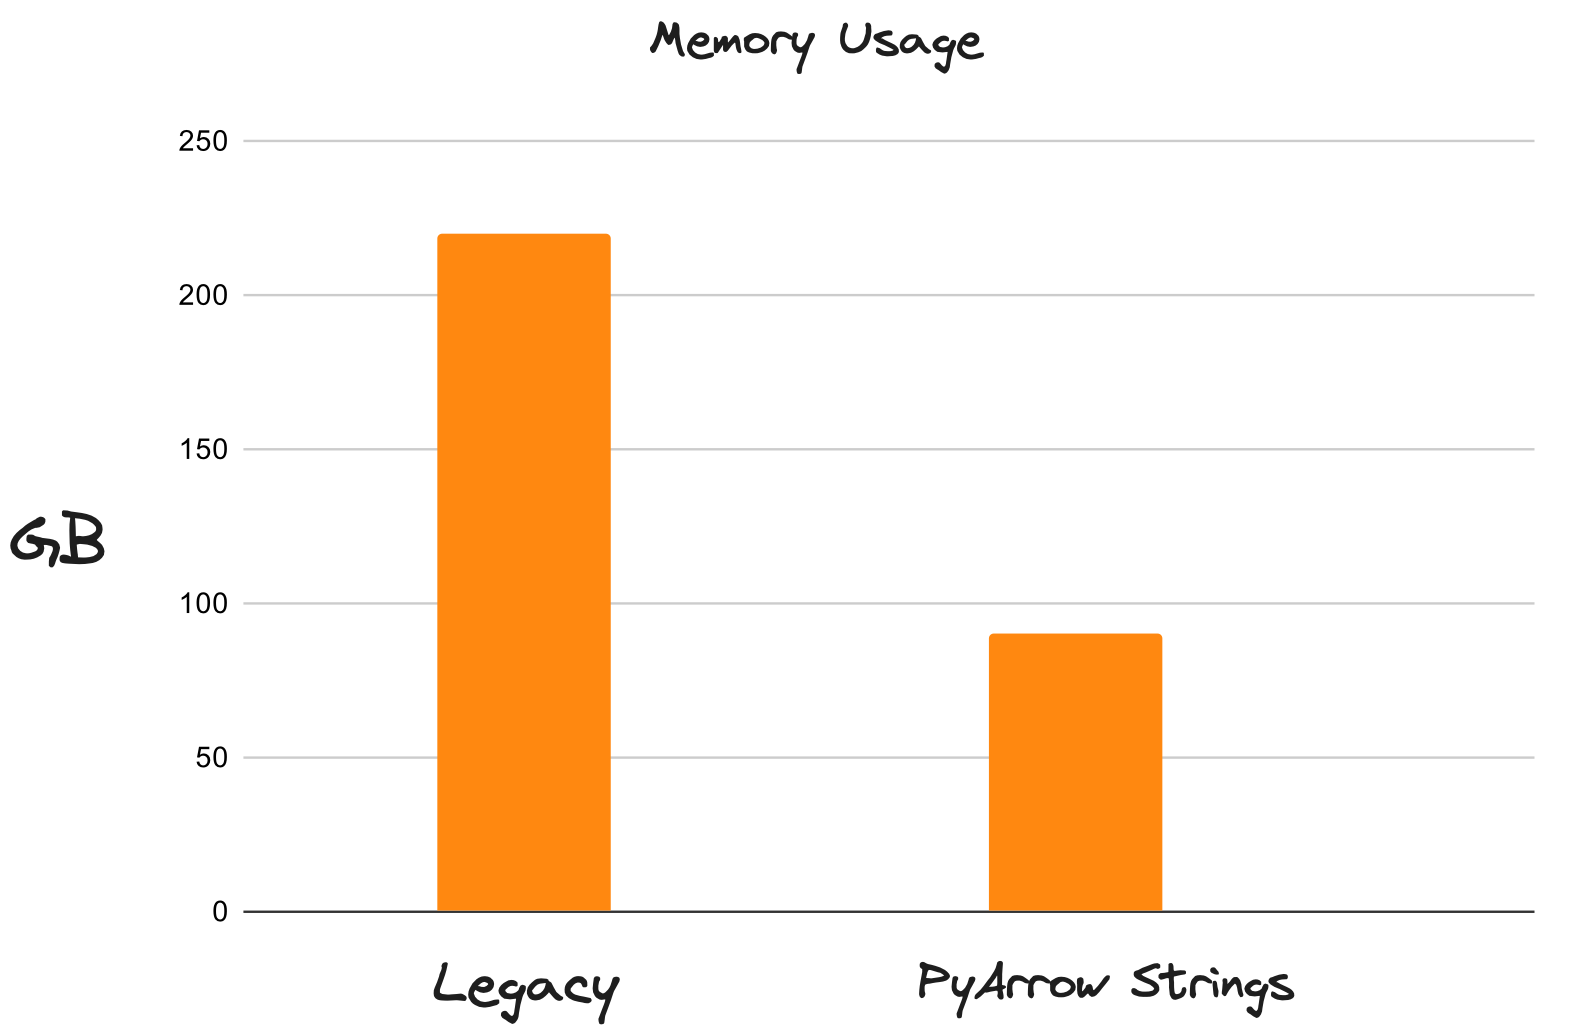 Bar chart comparing memory usage (GB) for Dask DataFrame with and without PyArrow strings. Dask DataFrame uses up to 80% less memory with PyArrow strings.